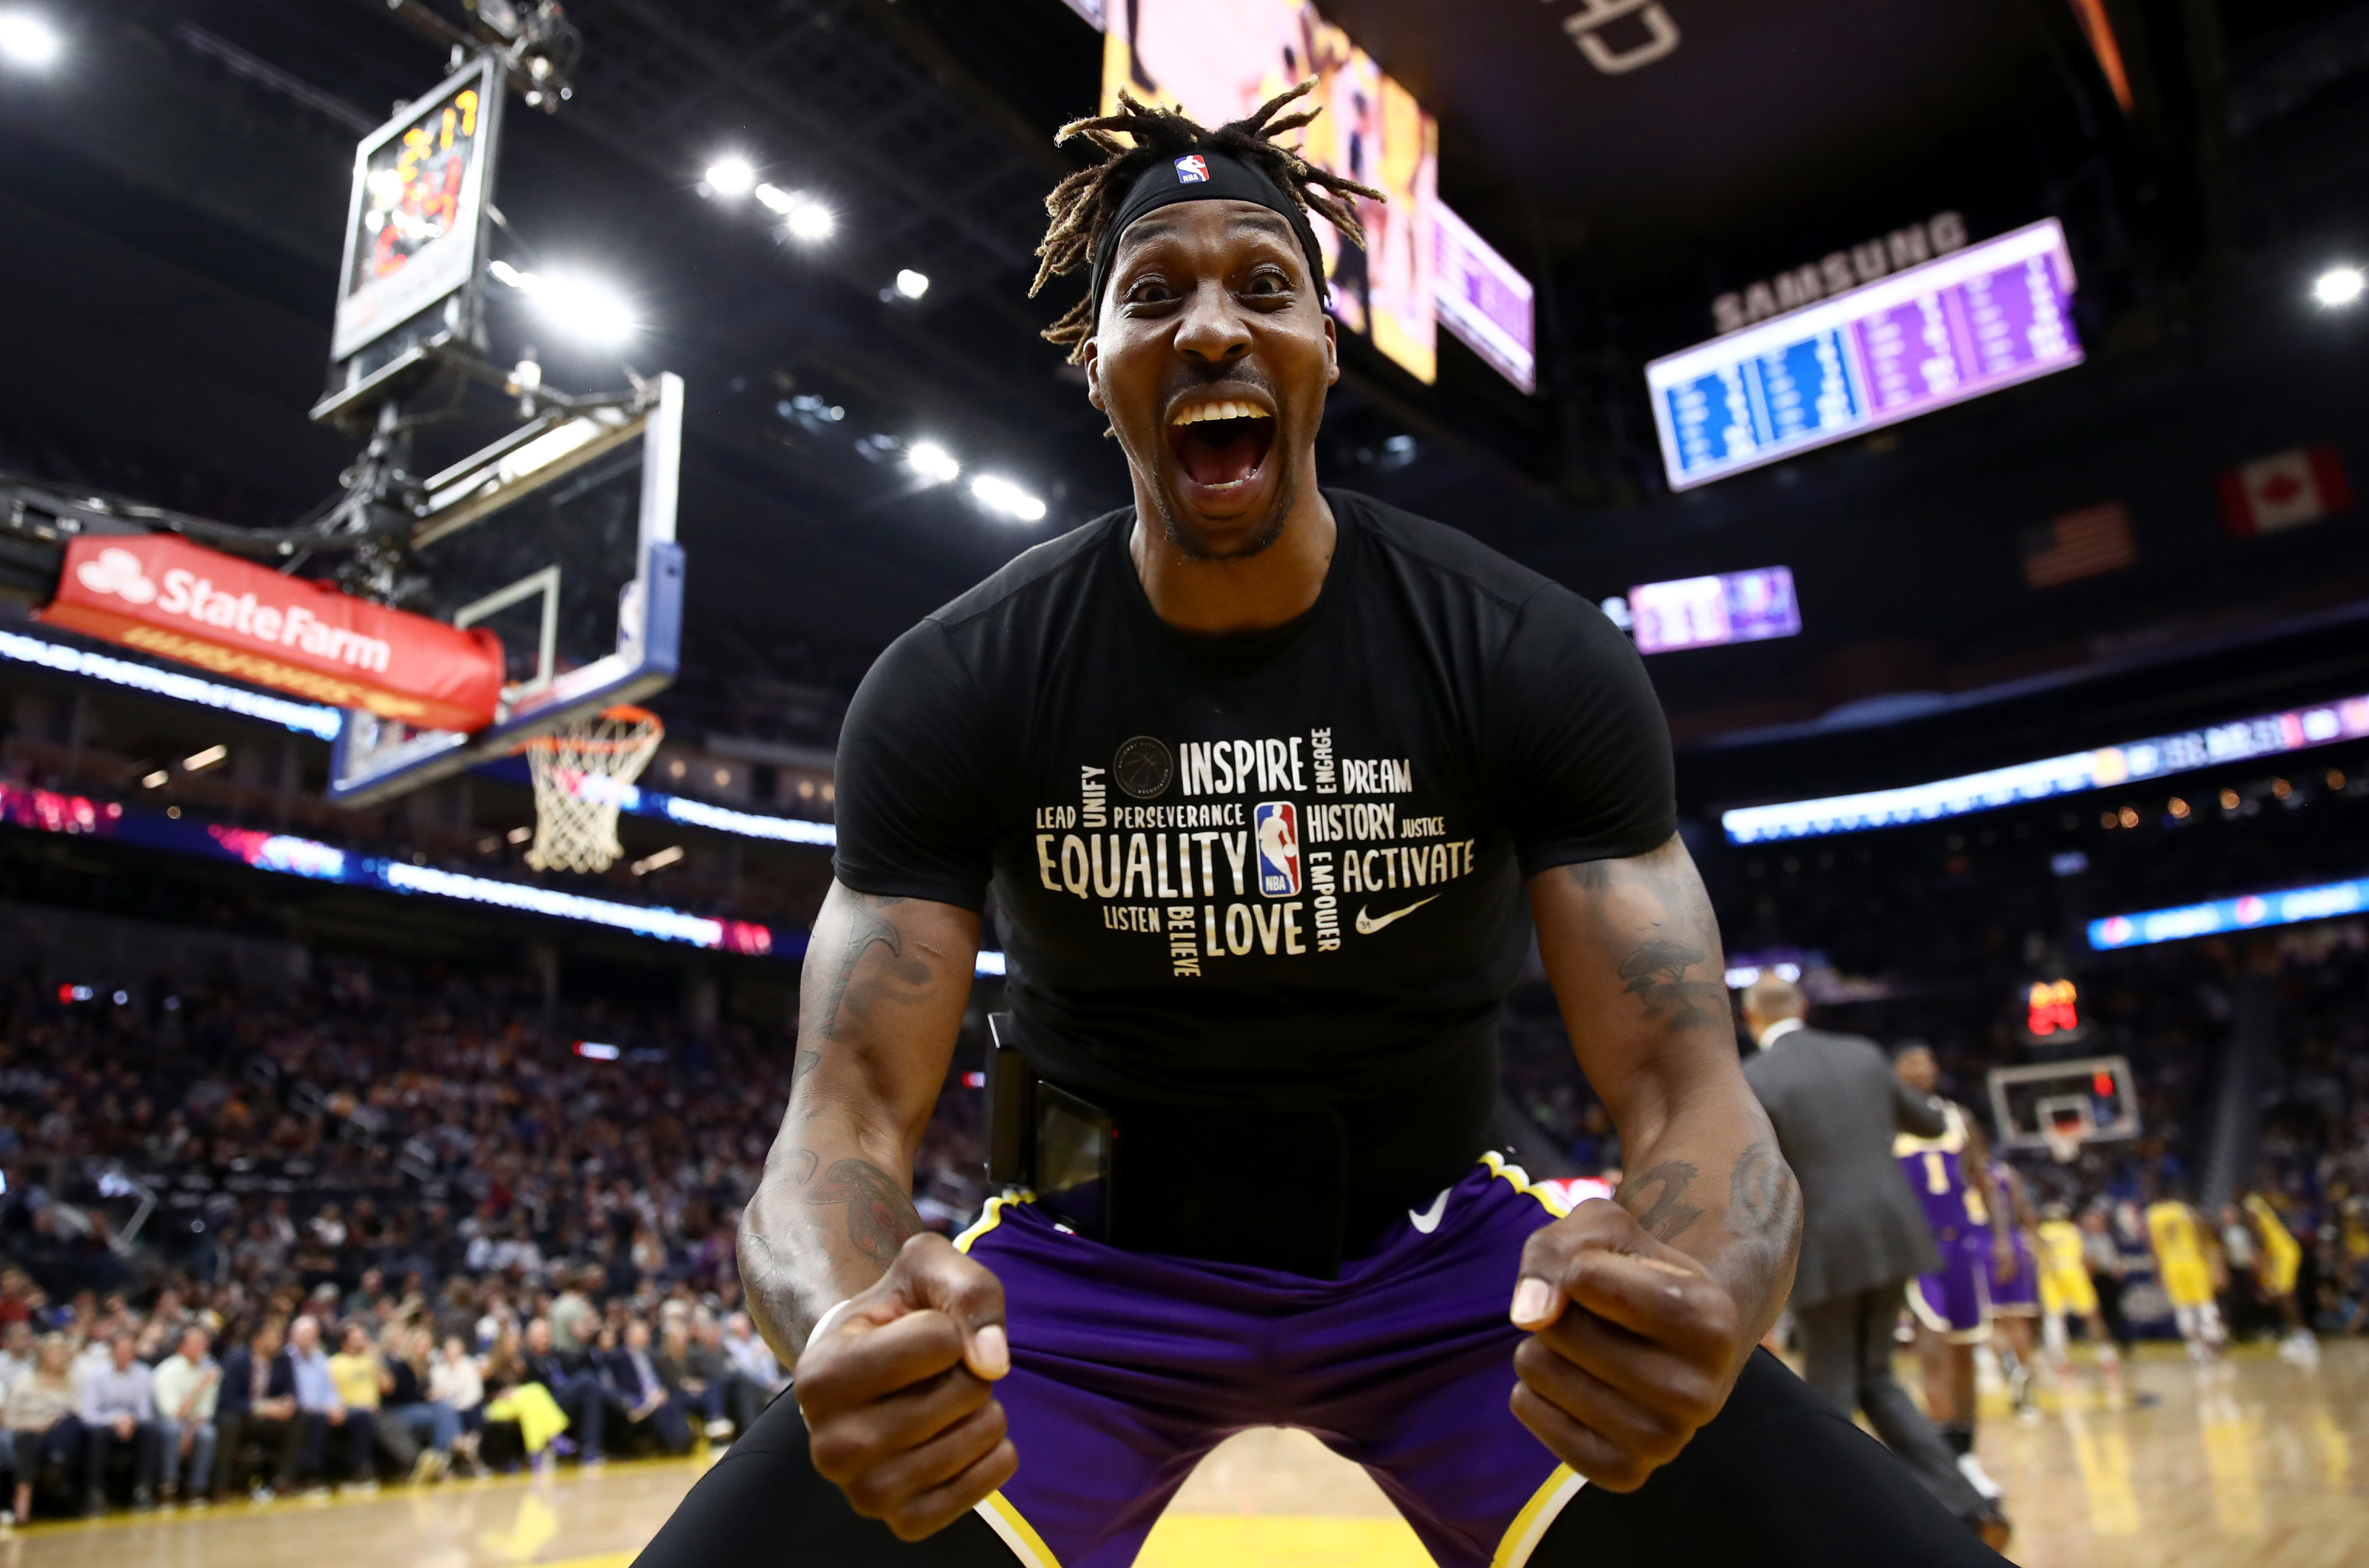 Lakers center Dwight Howard said the mom of his 6-year-old son